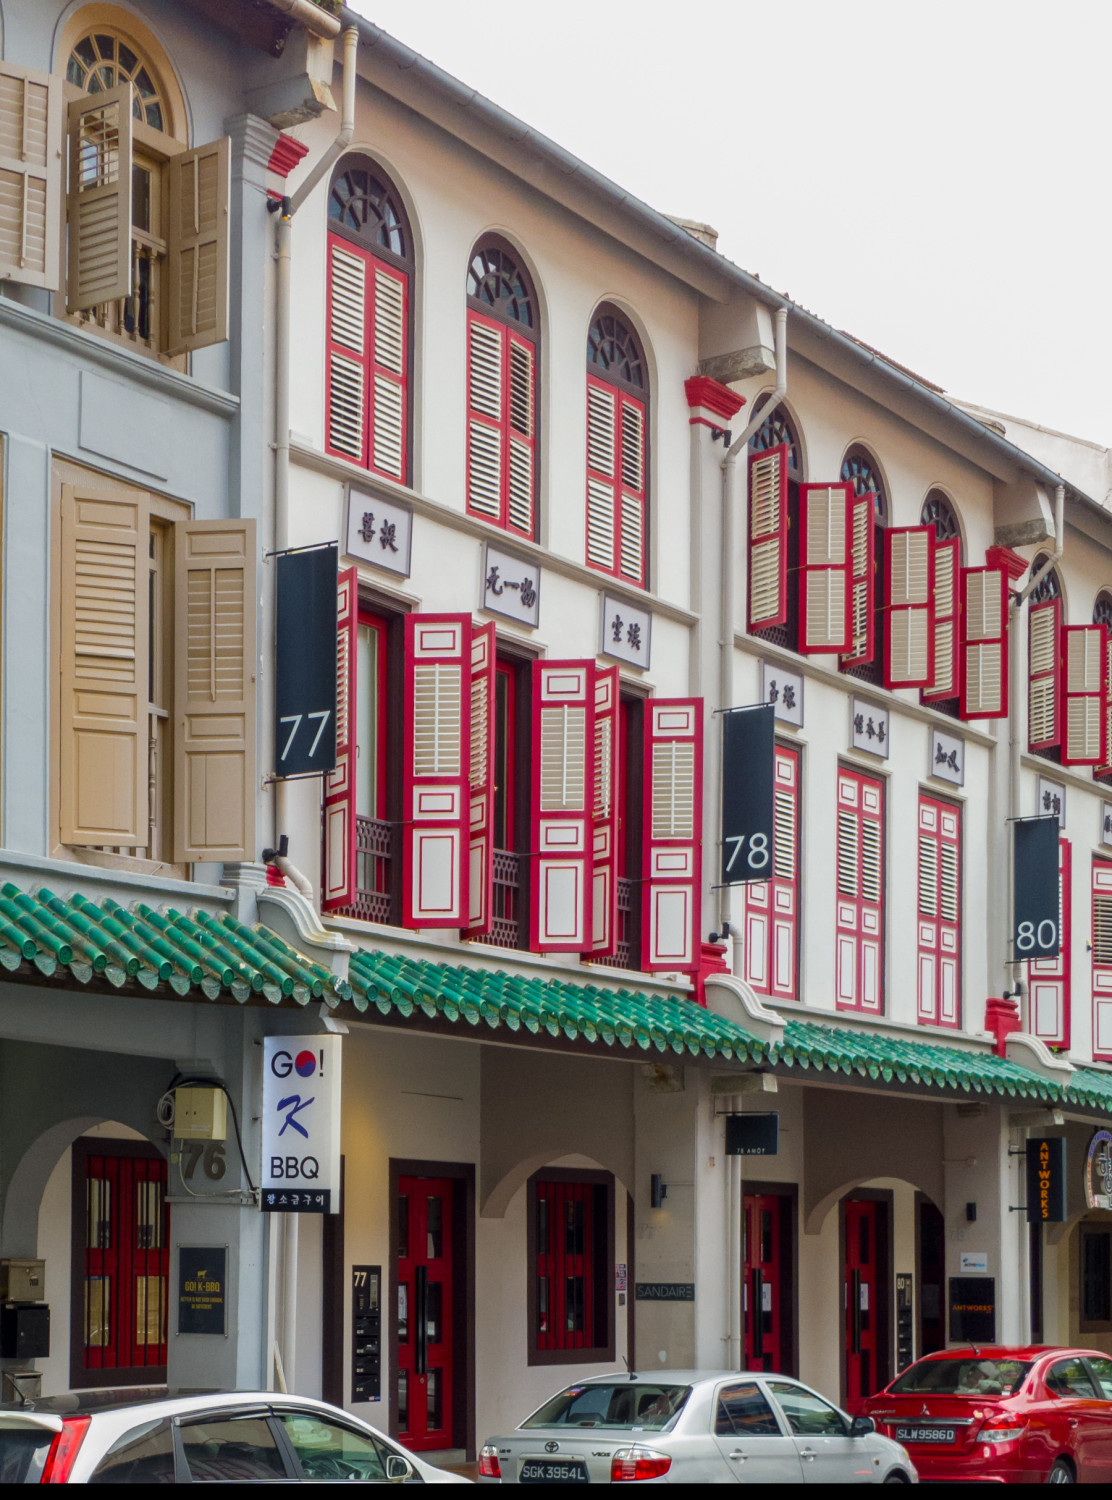 135 shophouses sold in 2020, 10% higher y-o-y - Property News